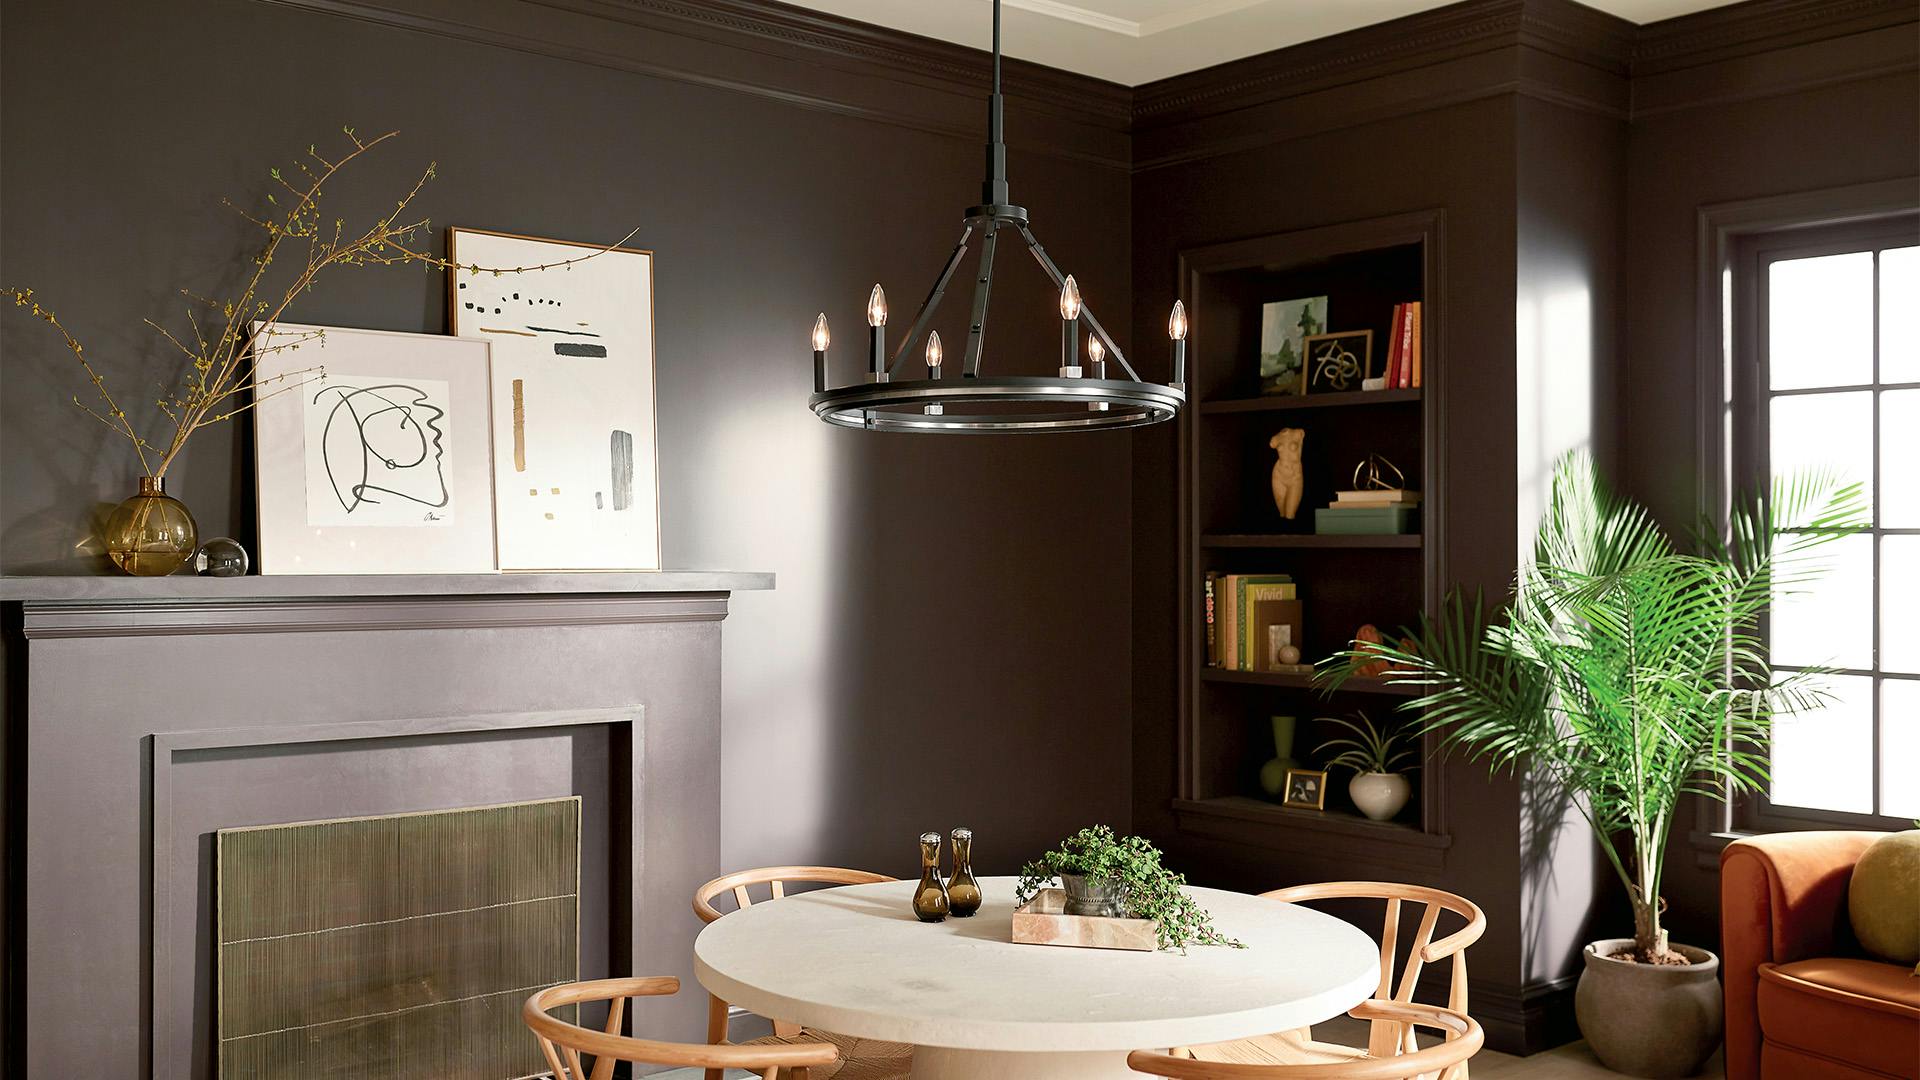 Dining room with dark brown walls and built in shelves with a black Emmala chandelier in the center